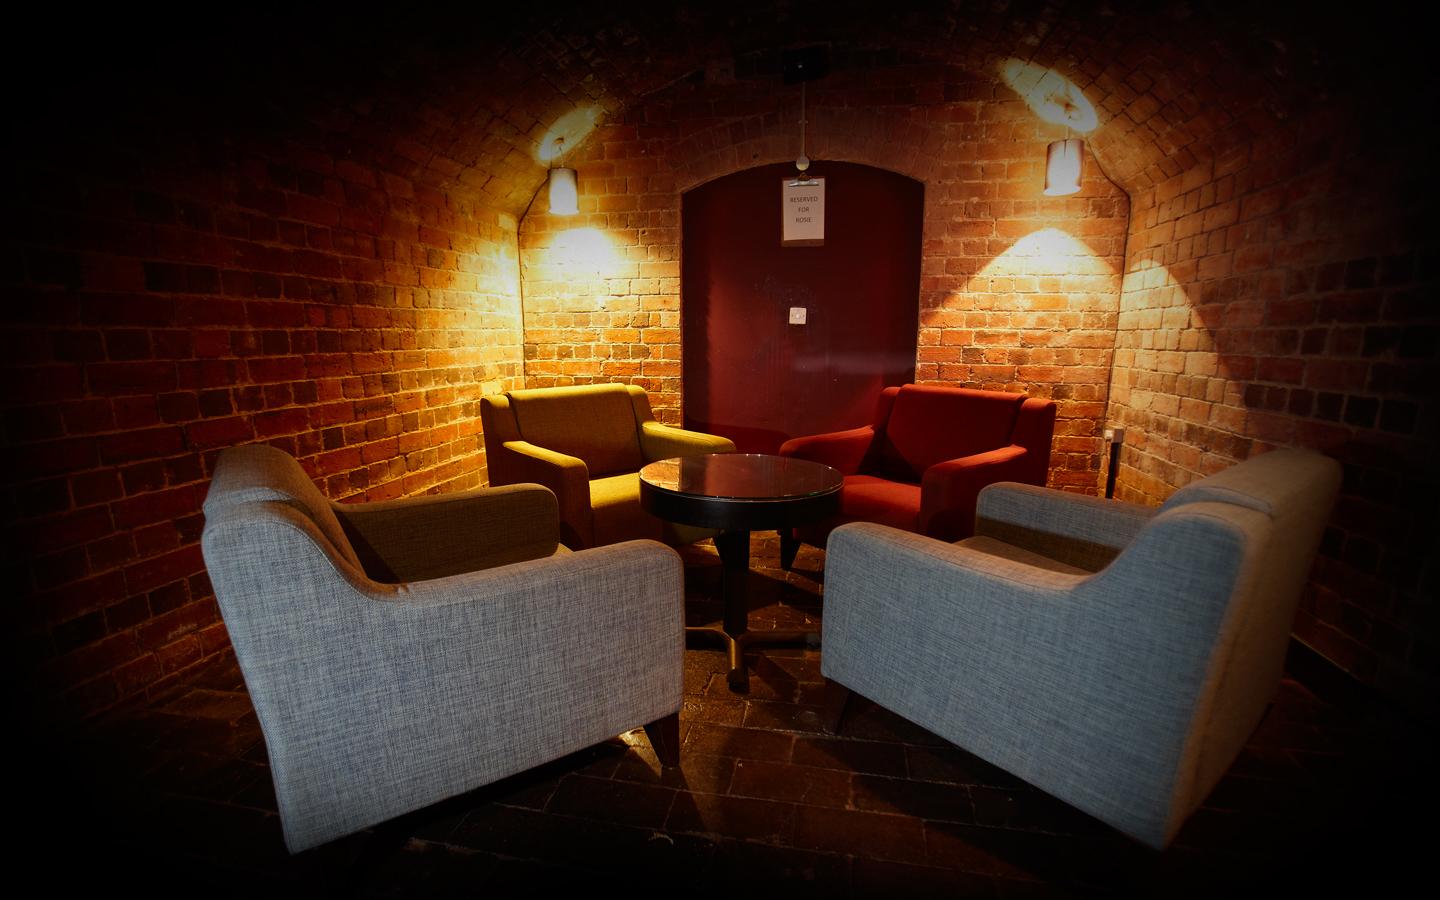 Speed Dating - Â£5 off! at The Vaults, Birmingham on 18th June